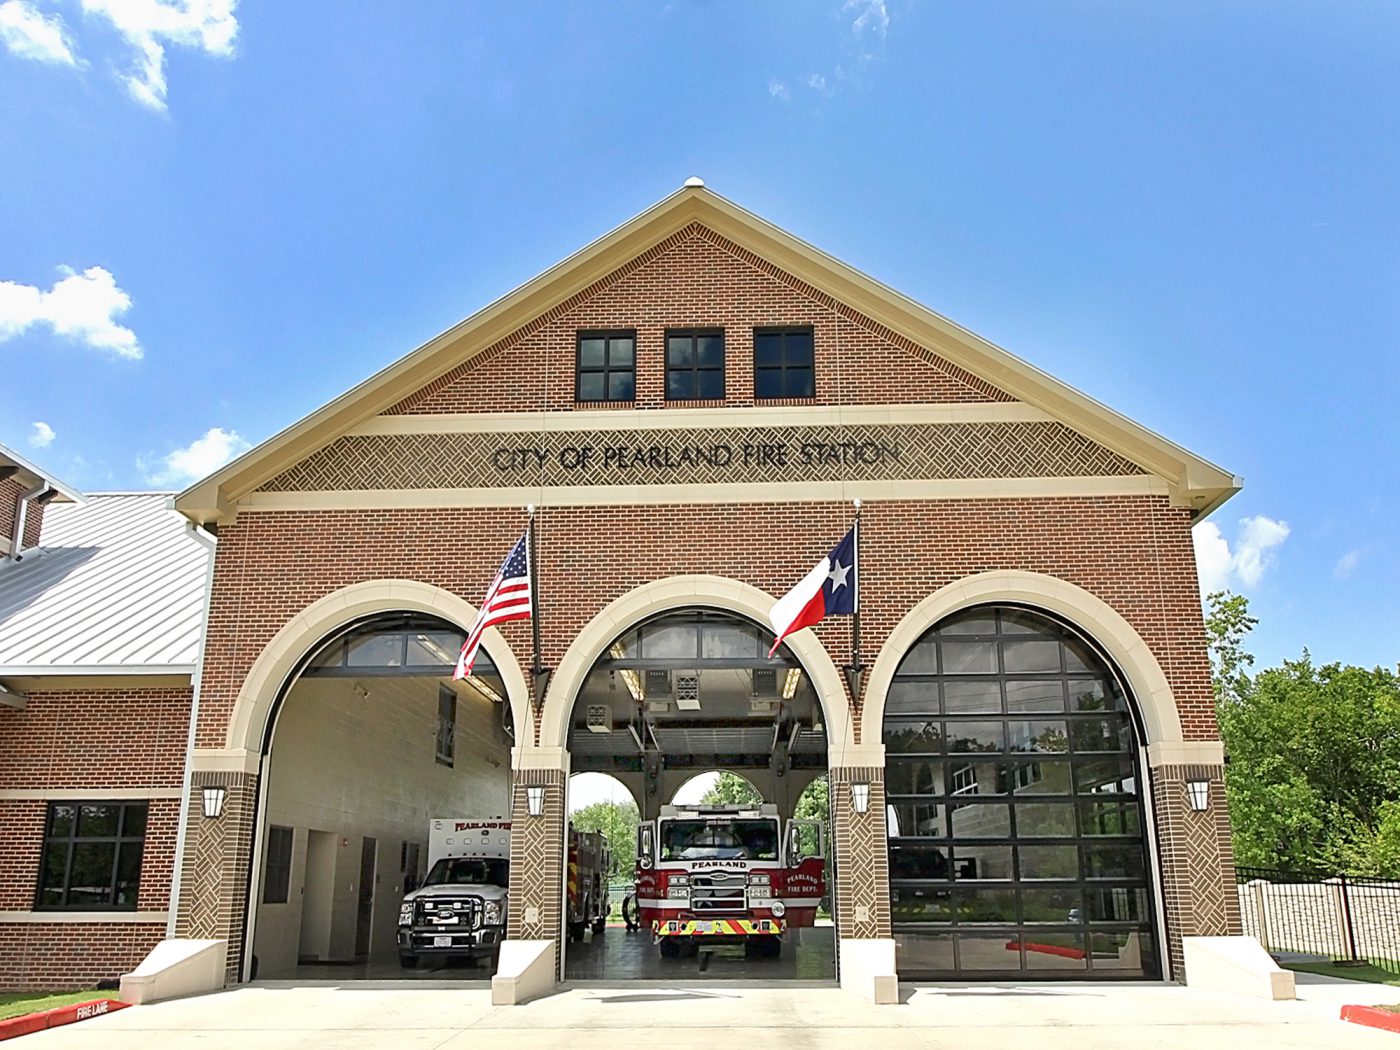 City of Pearland Fire Station